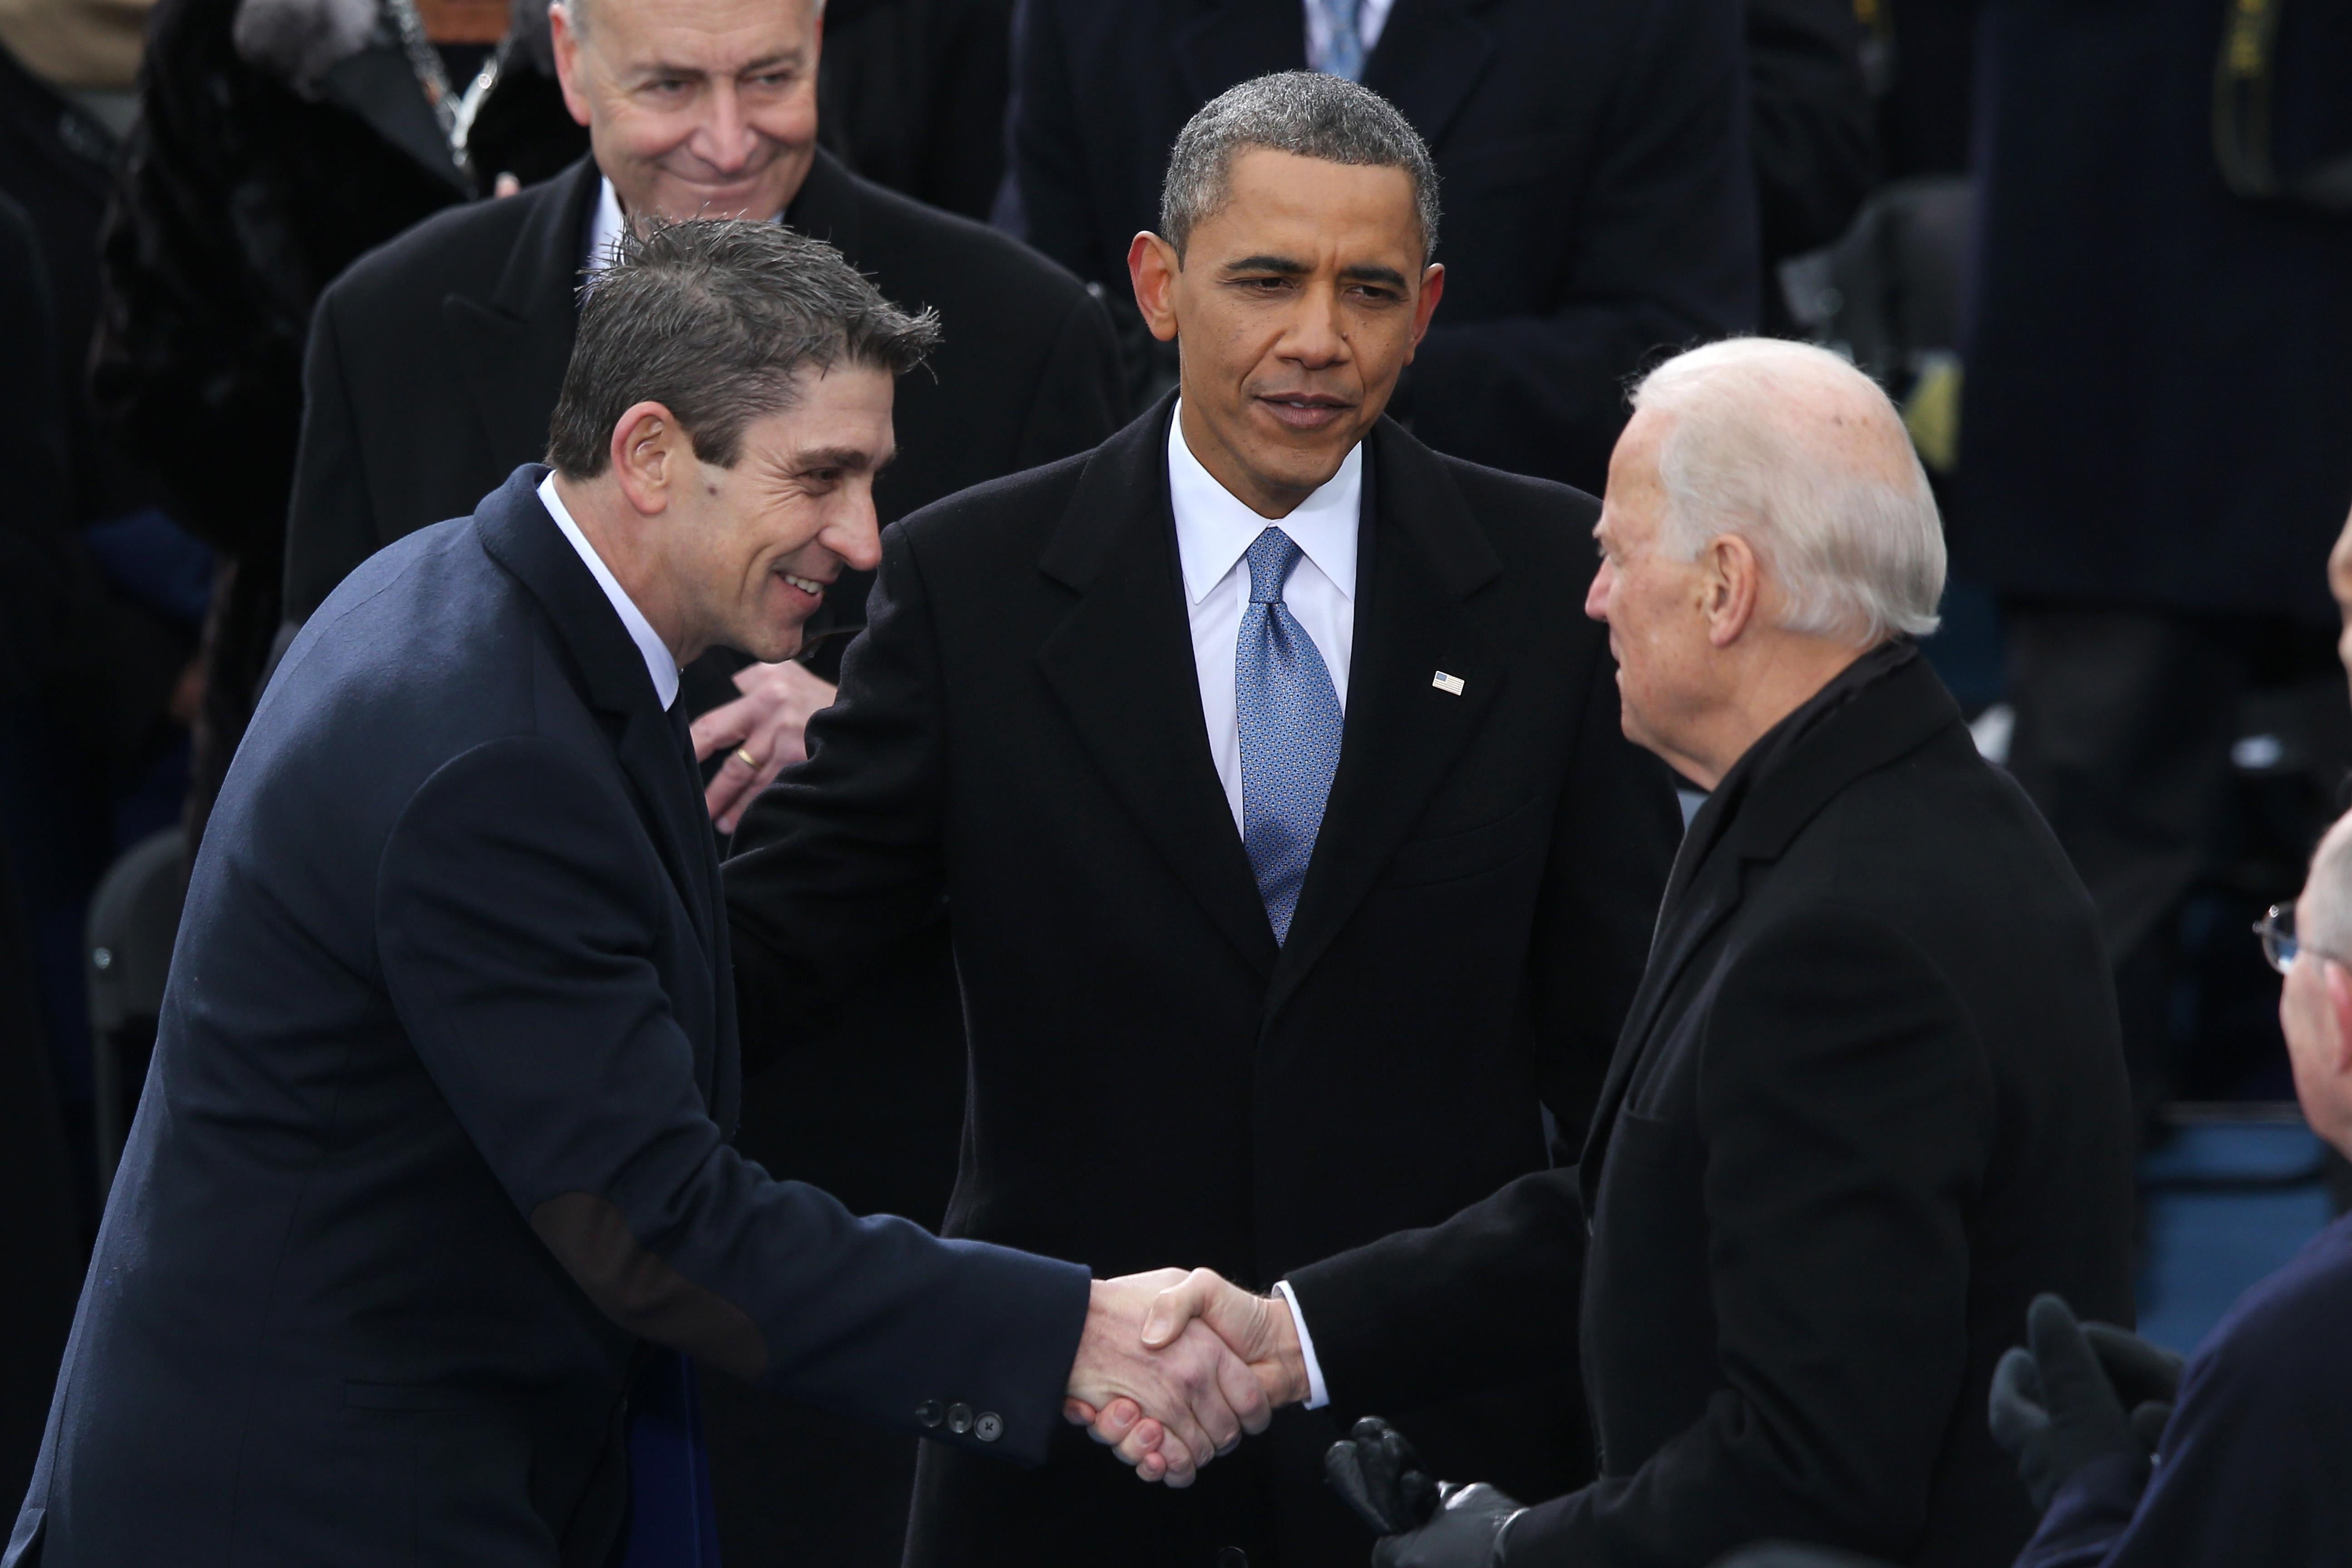 Richard Blanco shakes hands with Joe Biden while Obama stands behind them.